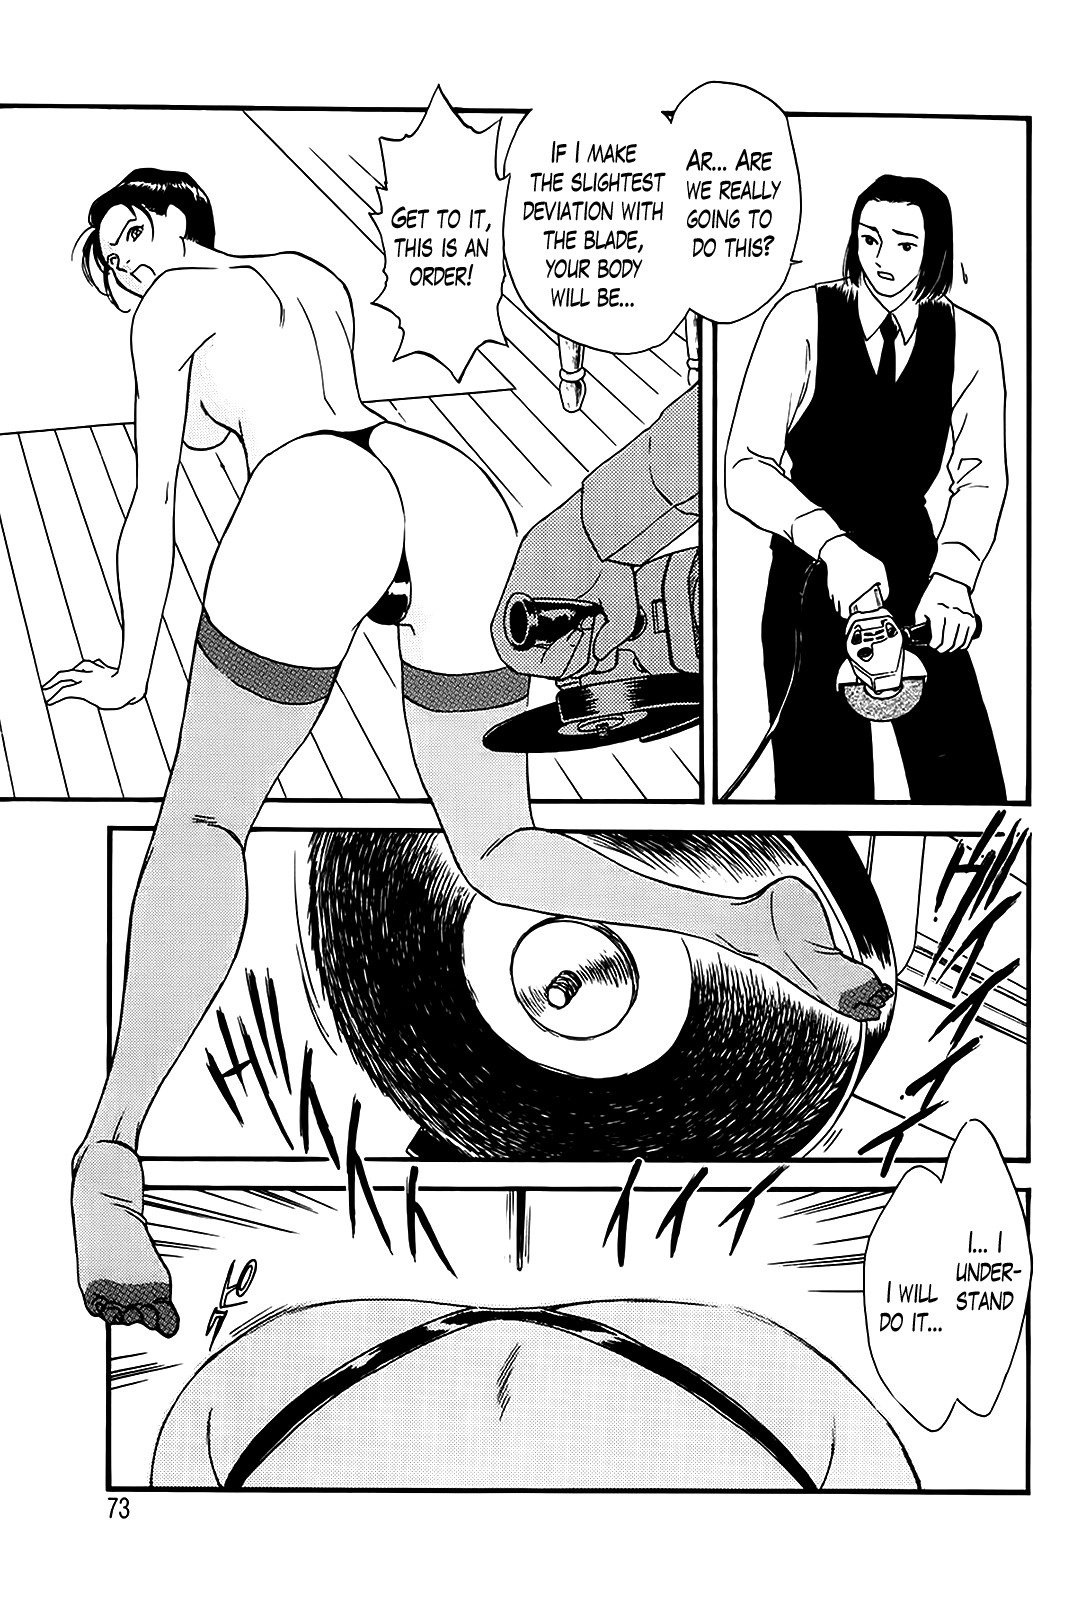 View Chastity Belt Porn Comics Page 9 Of 65 Hentai Online Porn Manga And Doujinshi 9 Hentai